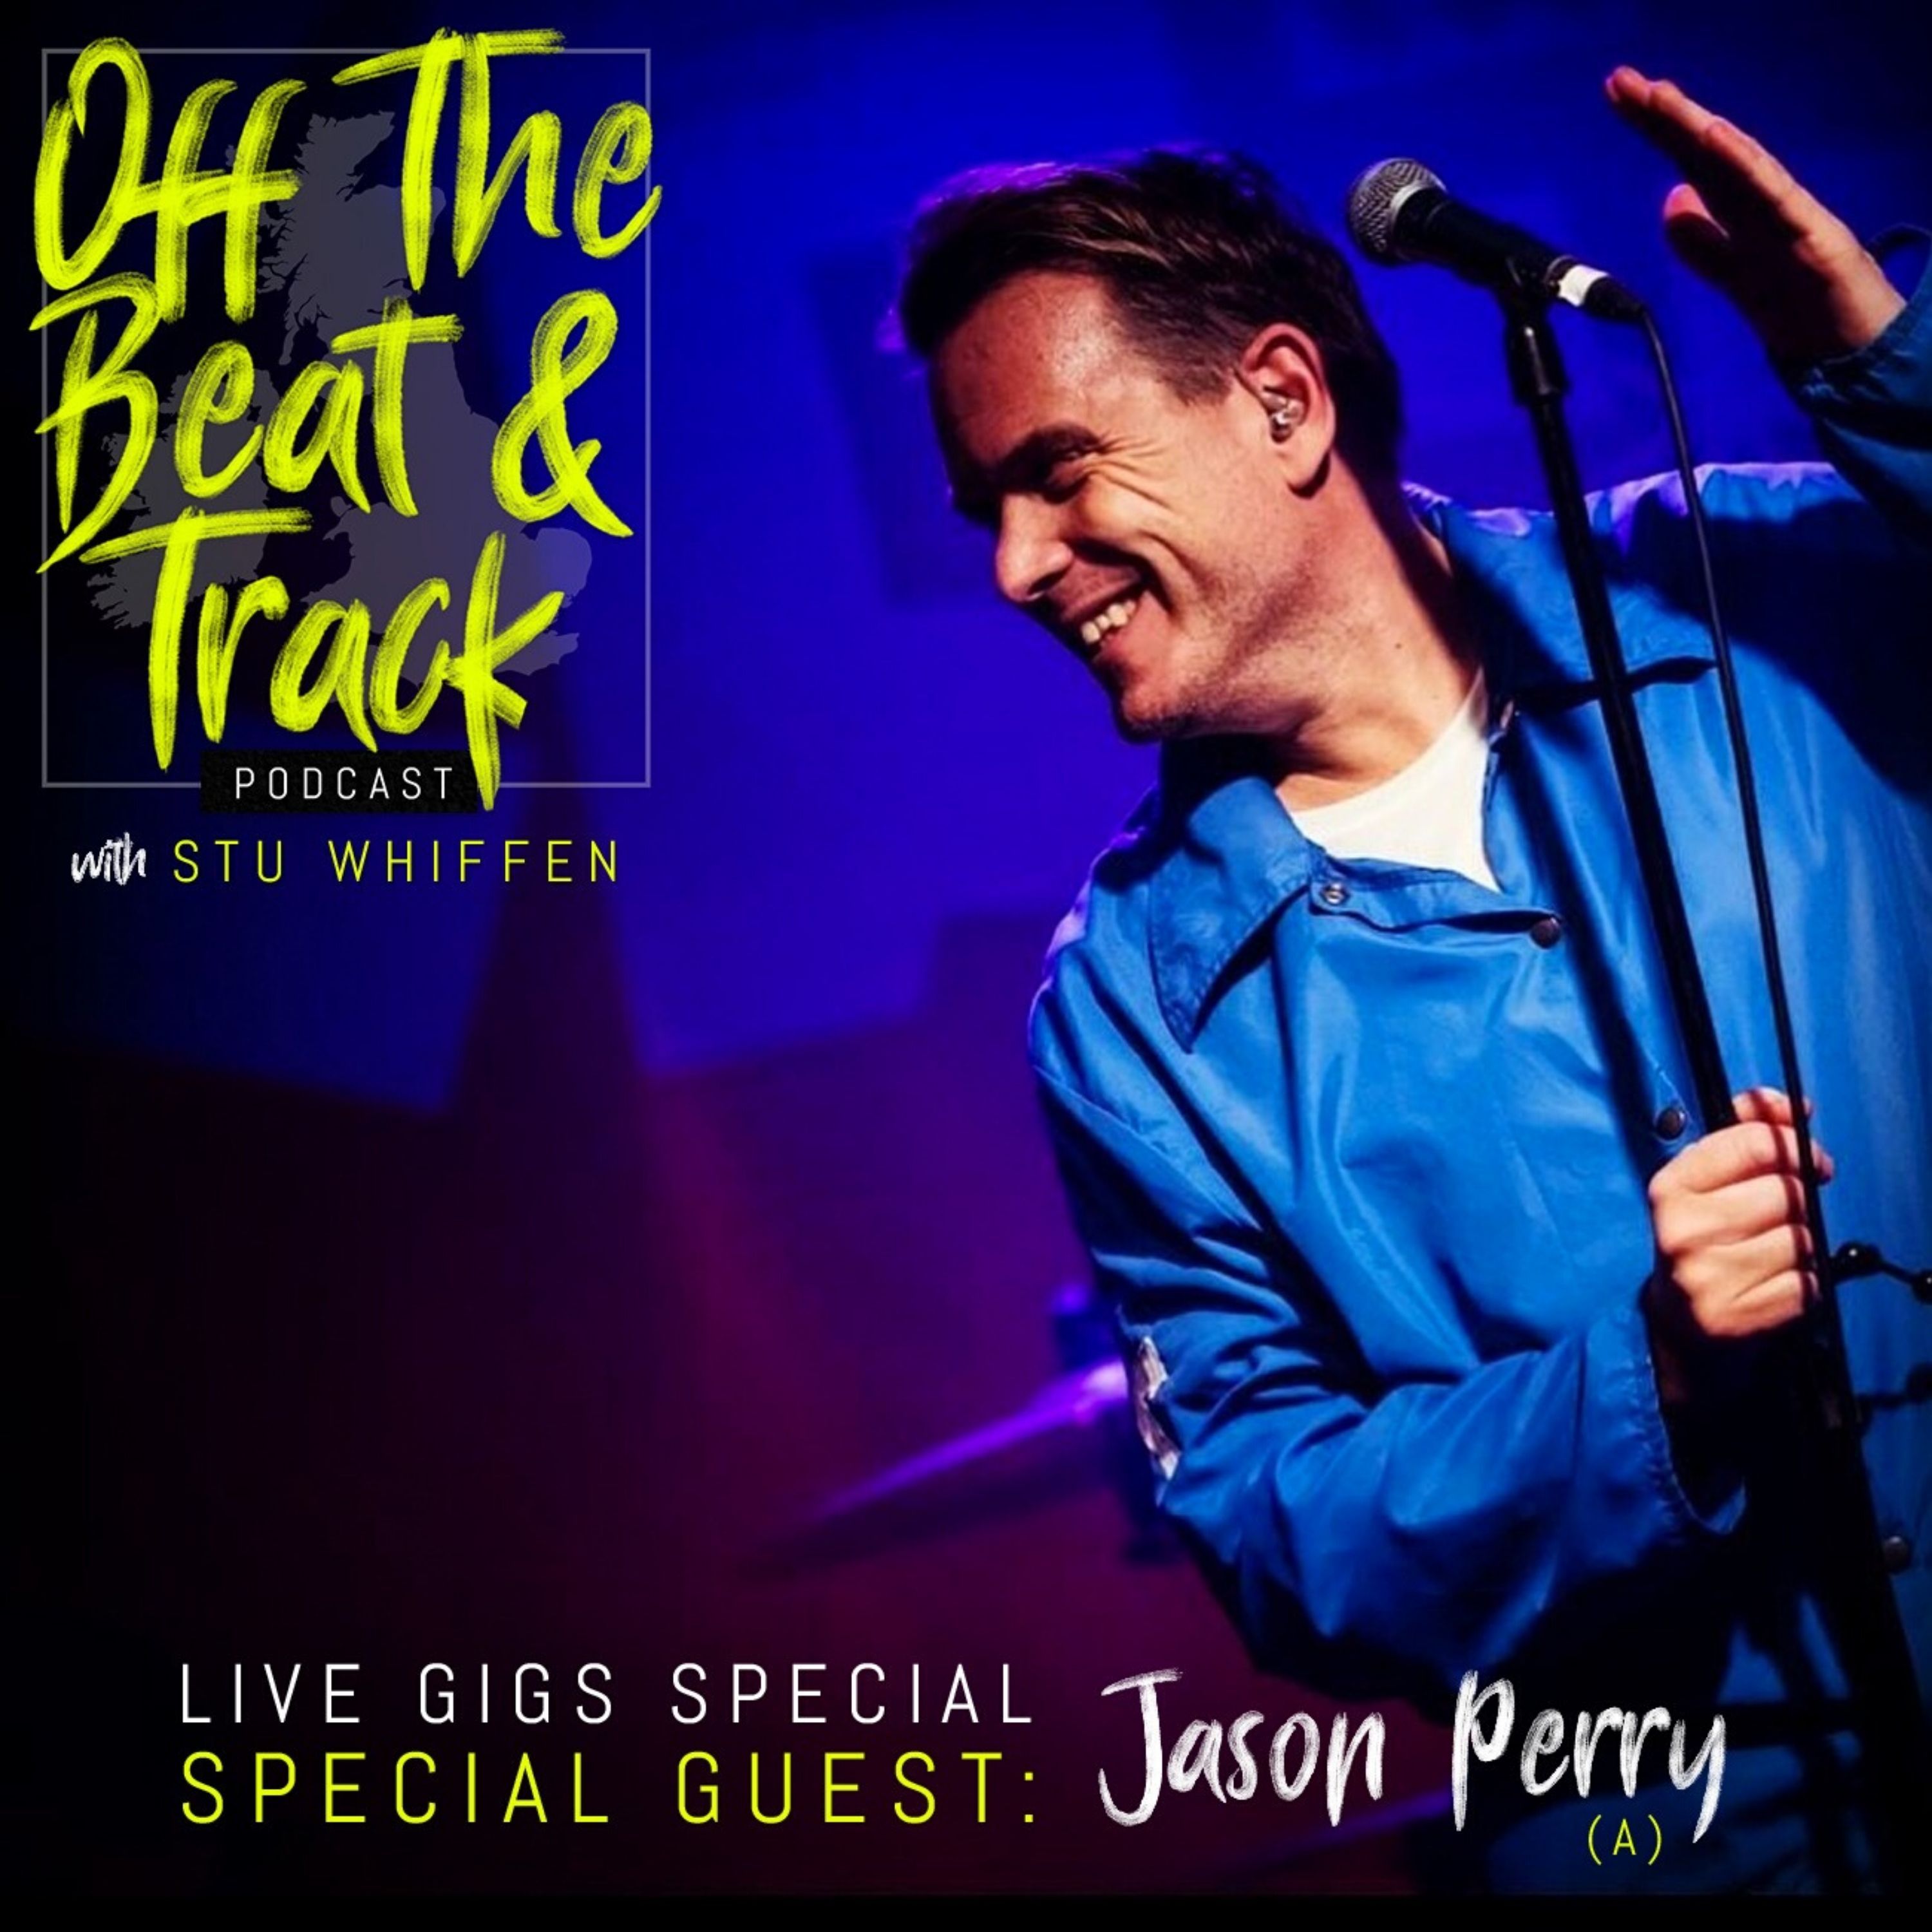 cover art for Special Guest - Jason Perry of A (live gigs special)